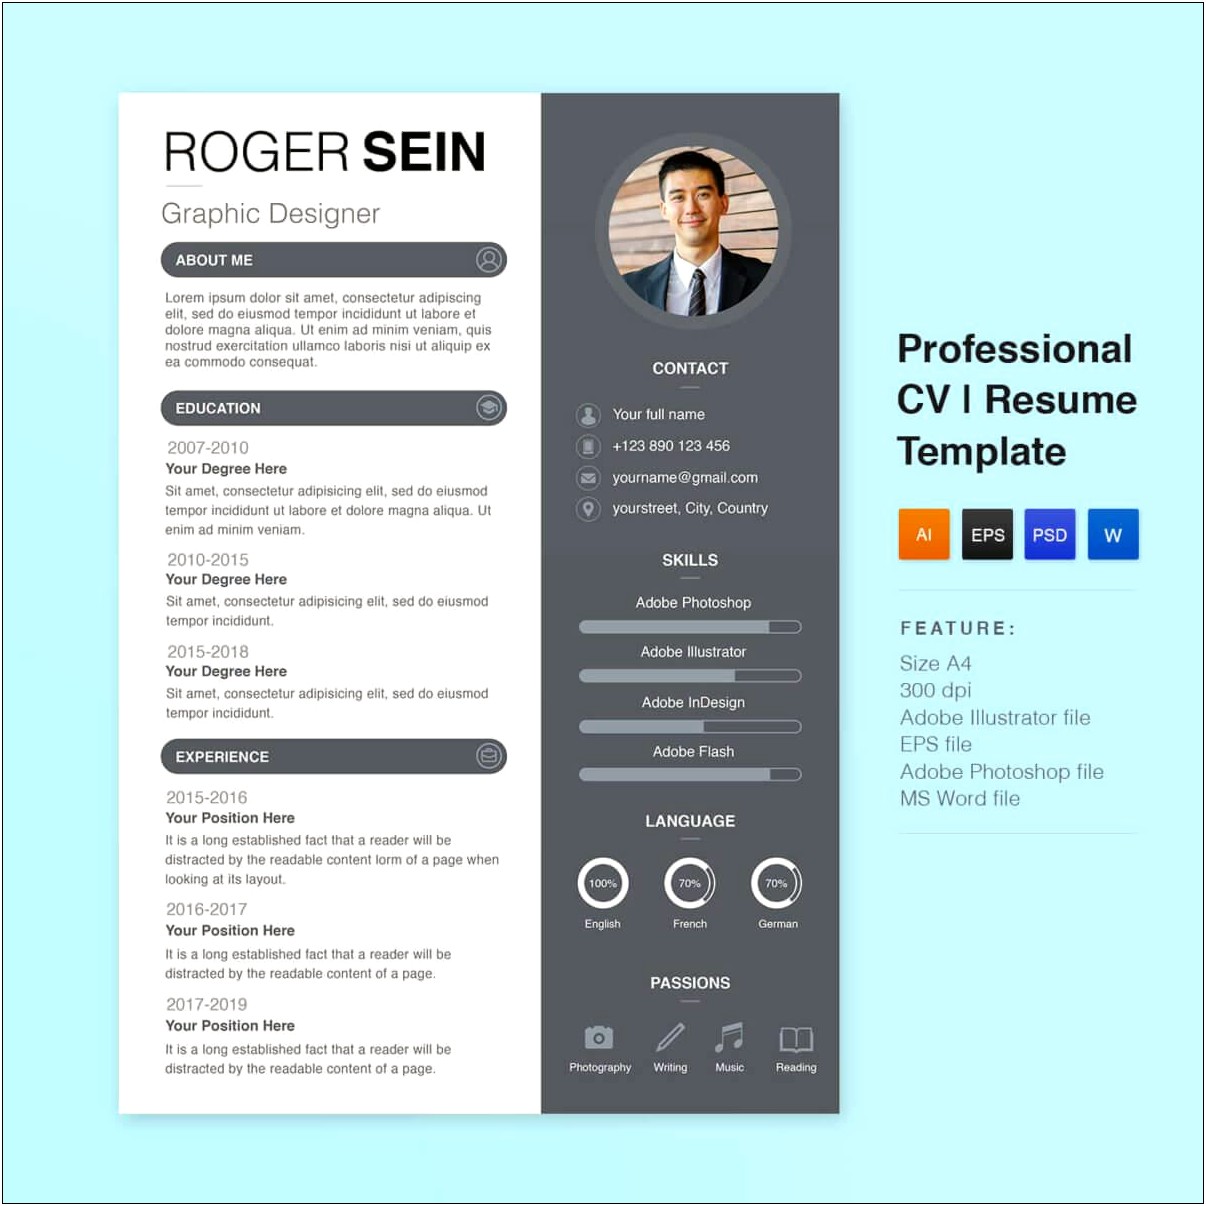 Resume New Format 2019 Free Download